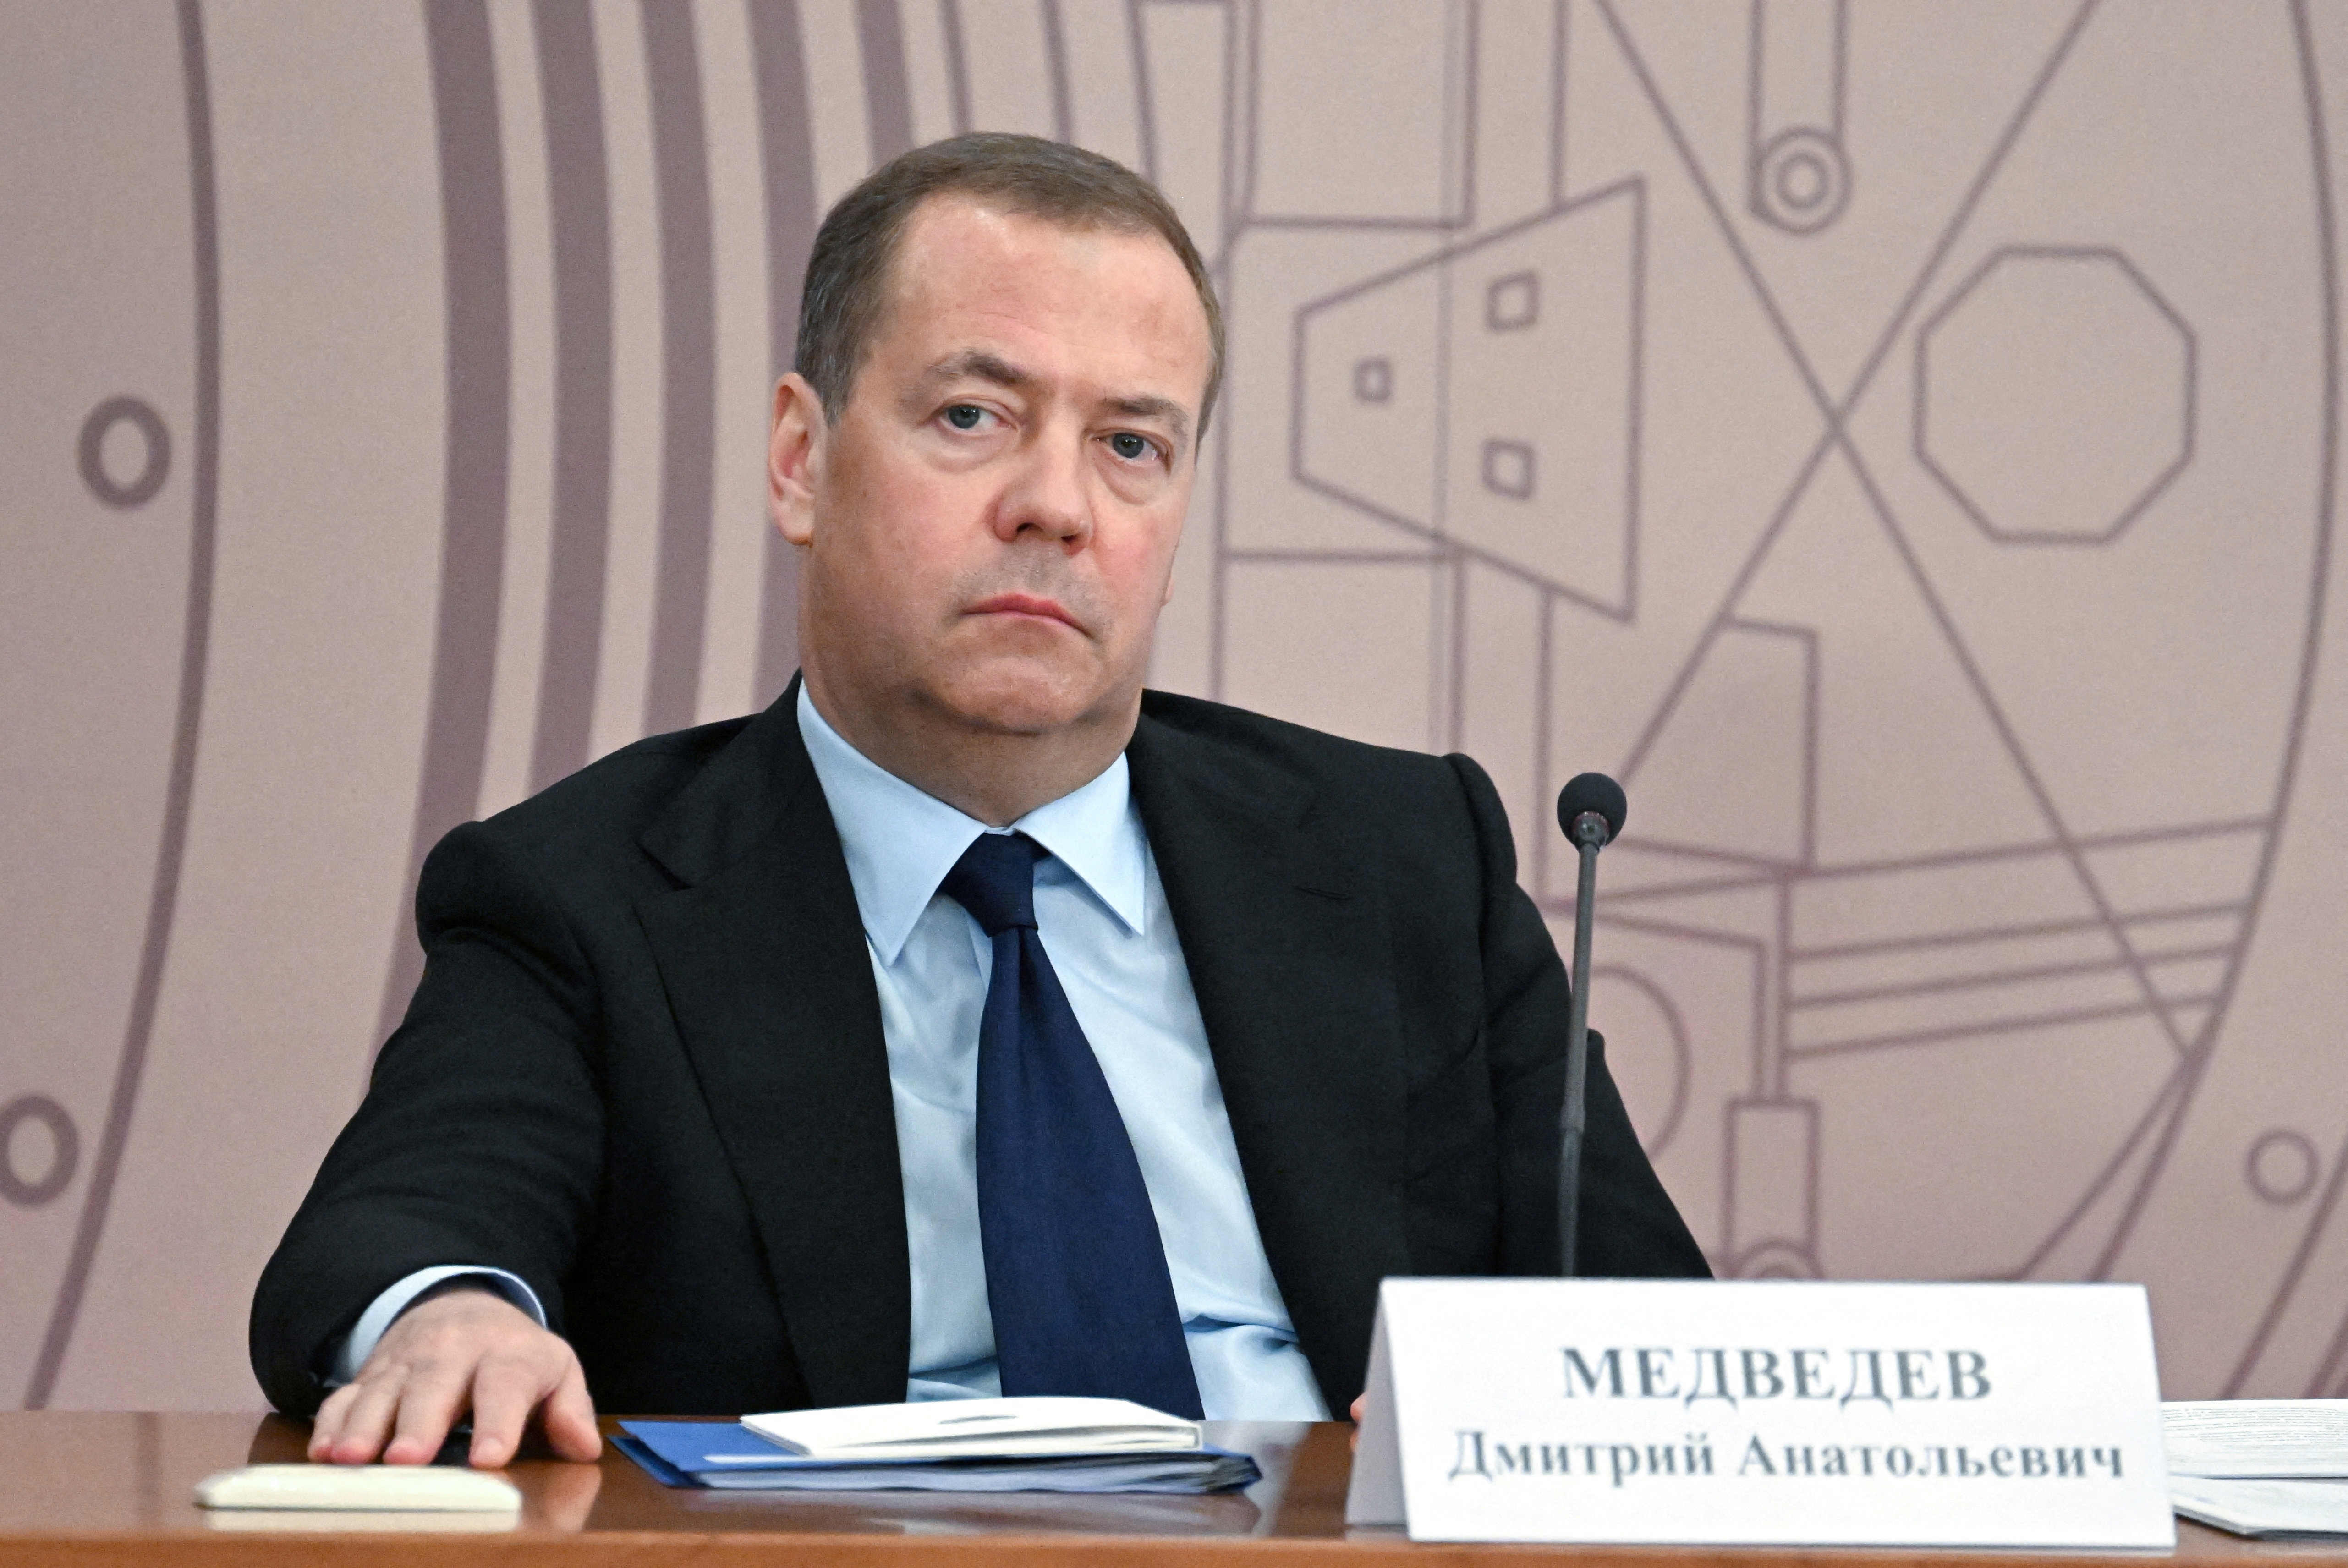 Russian Security Council's Deputy Chairman Medvedev attends a meeting near Moscow